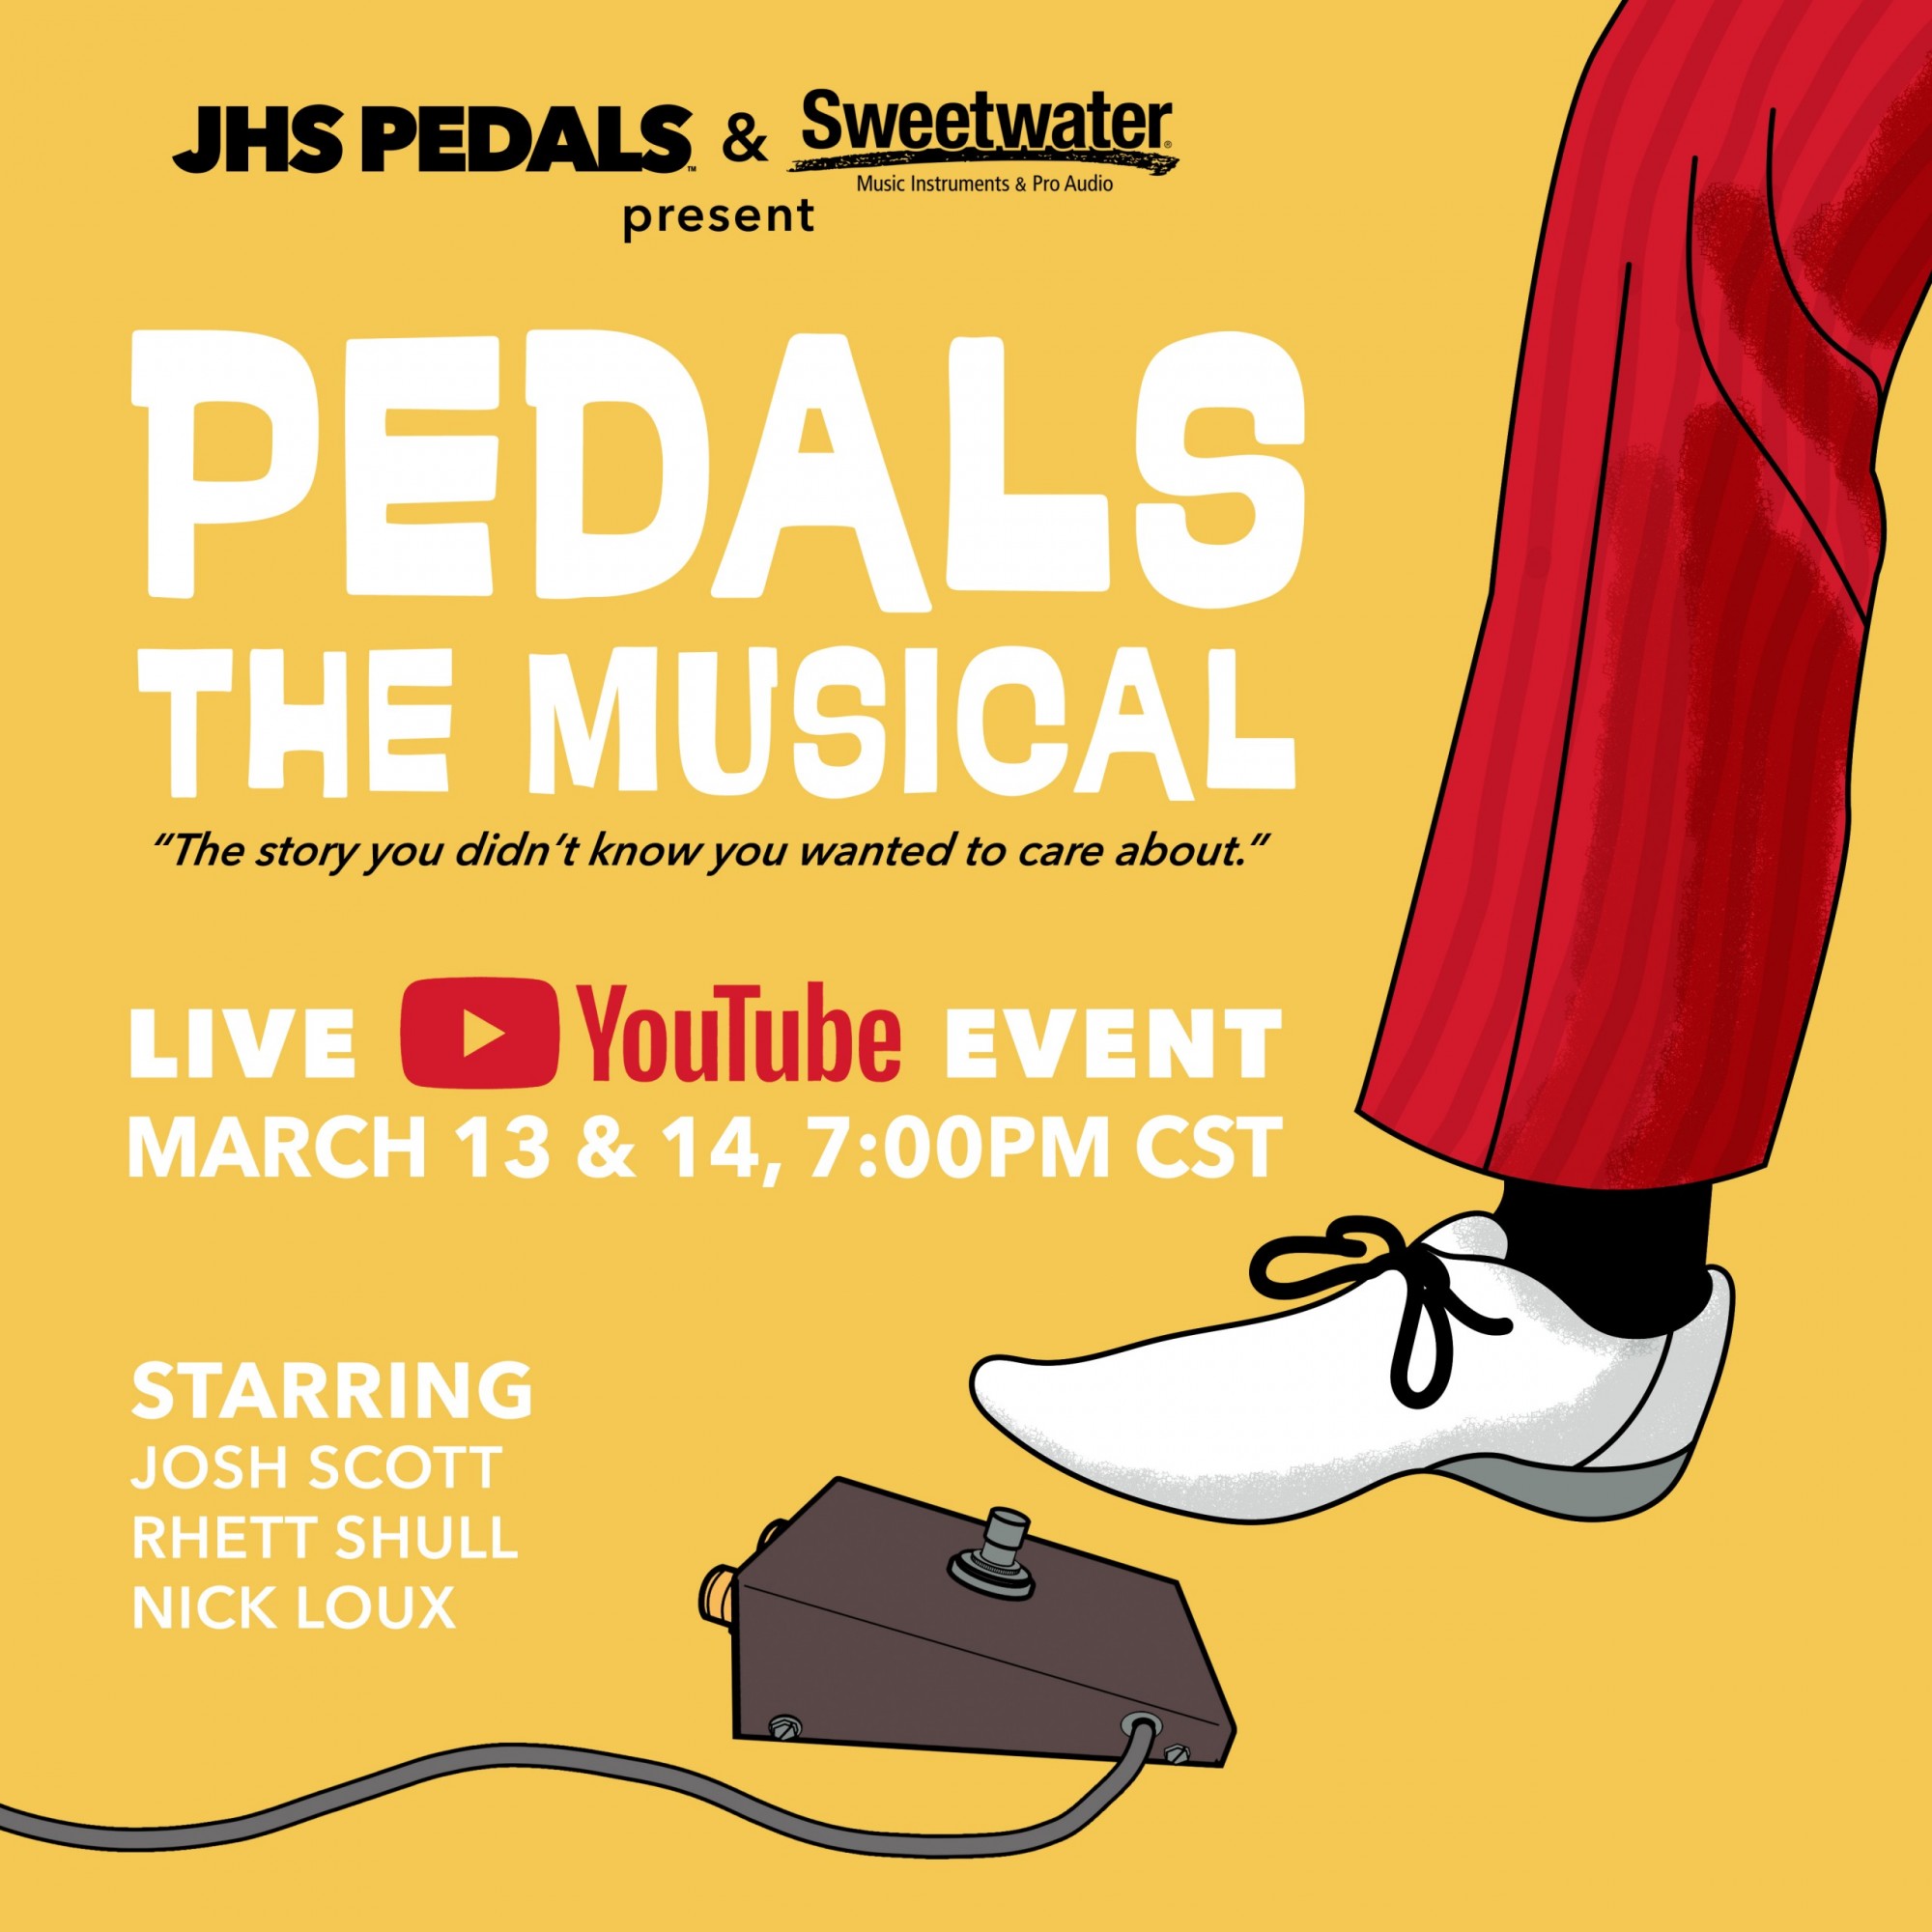 Pedals: The Musical from JHS Pedals stomps its way onto YouTube this